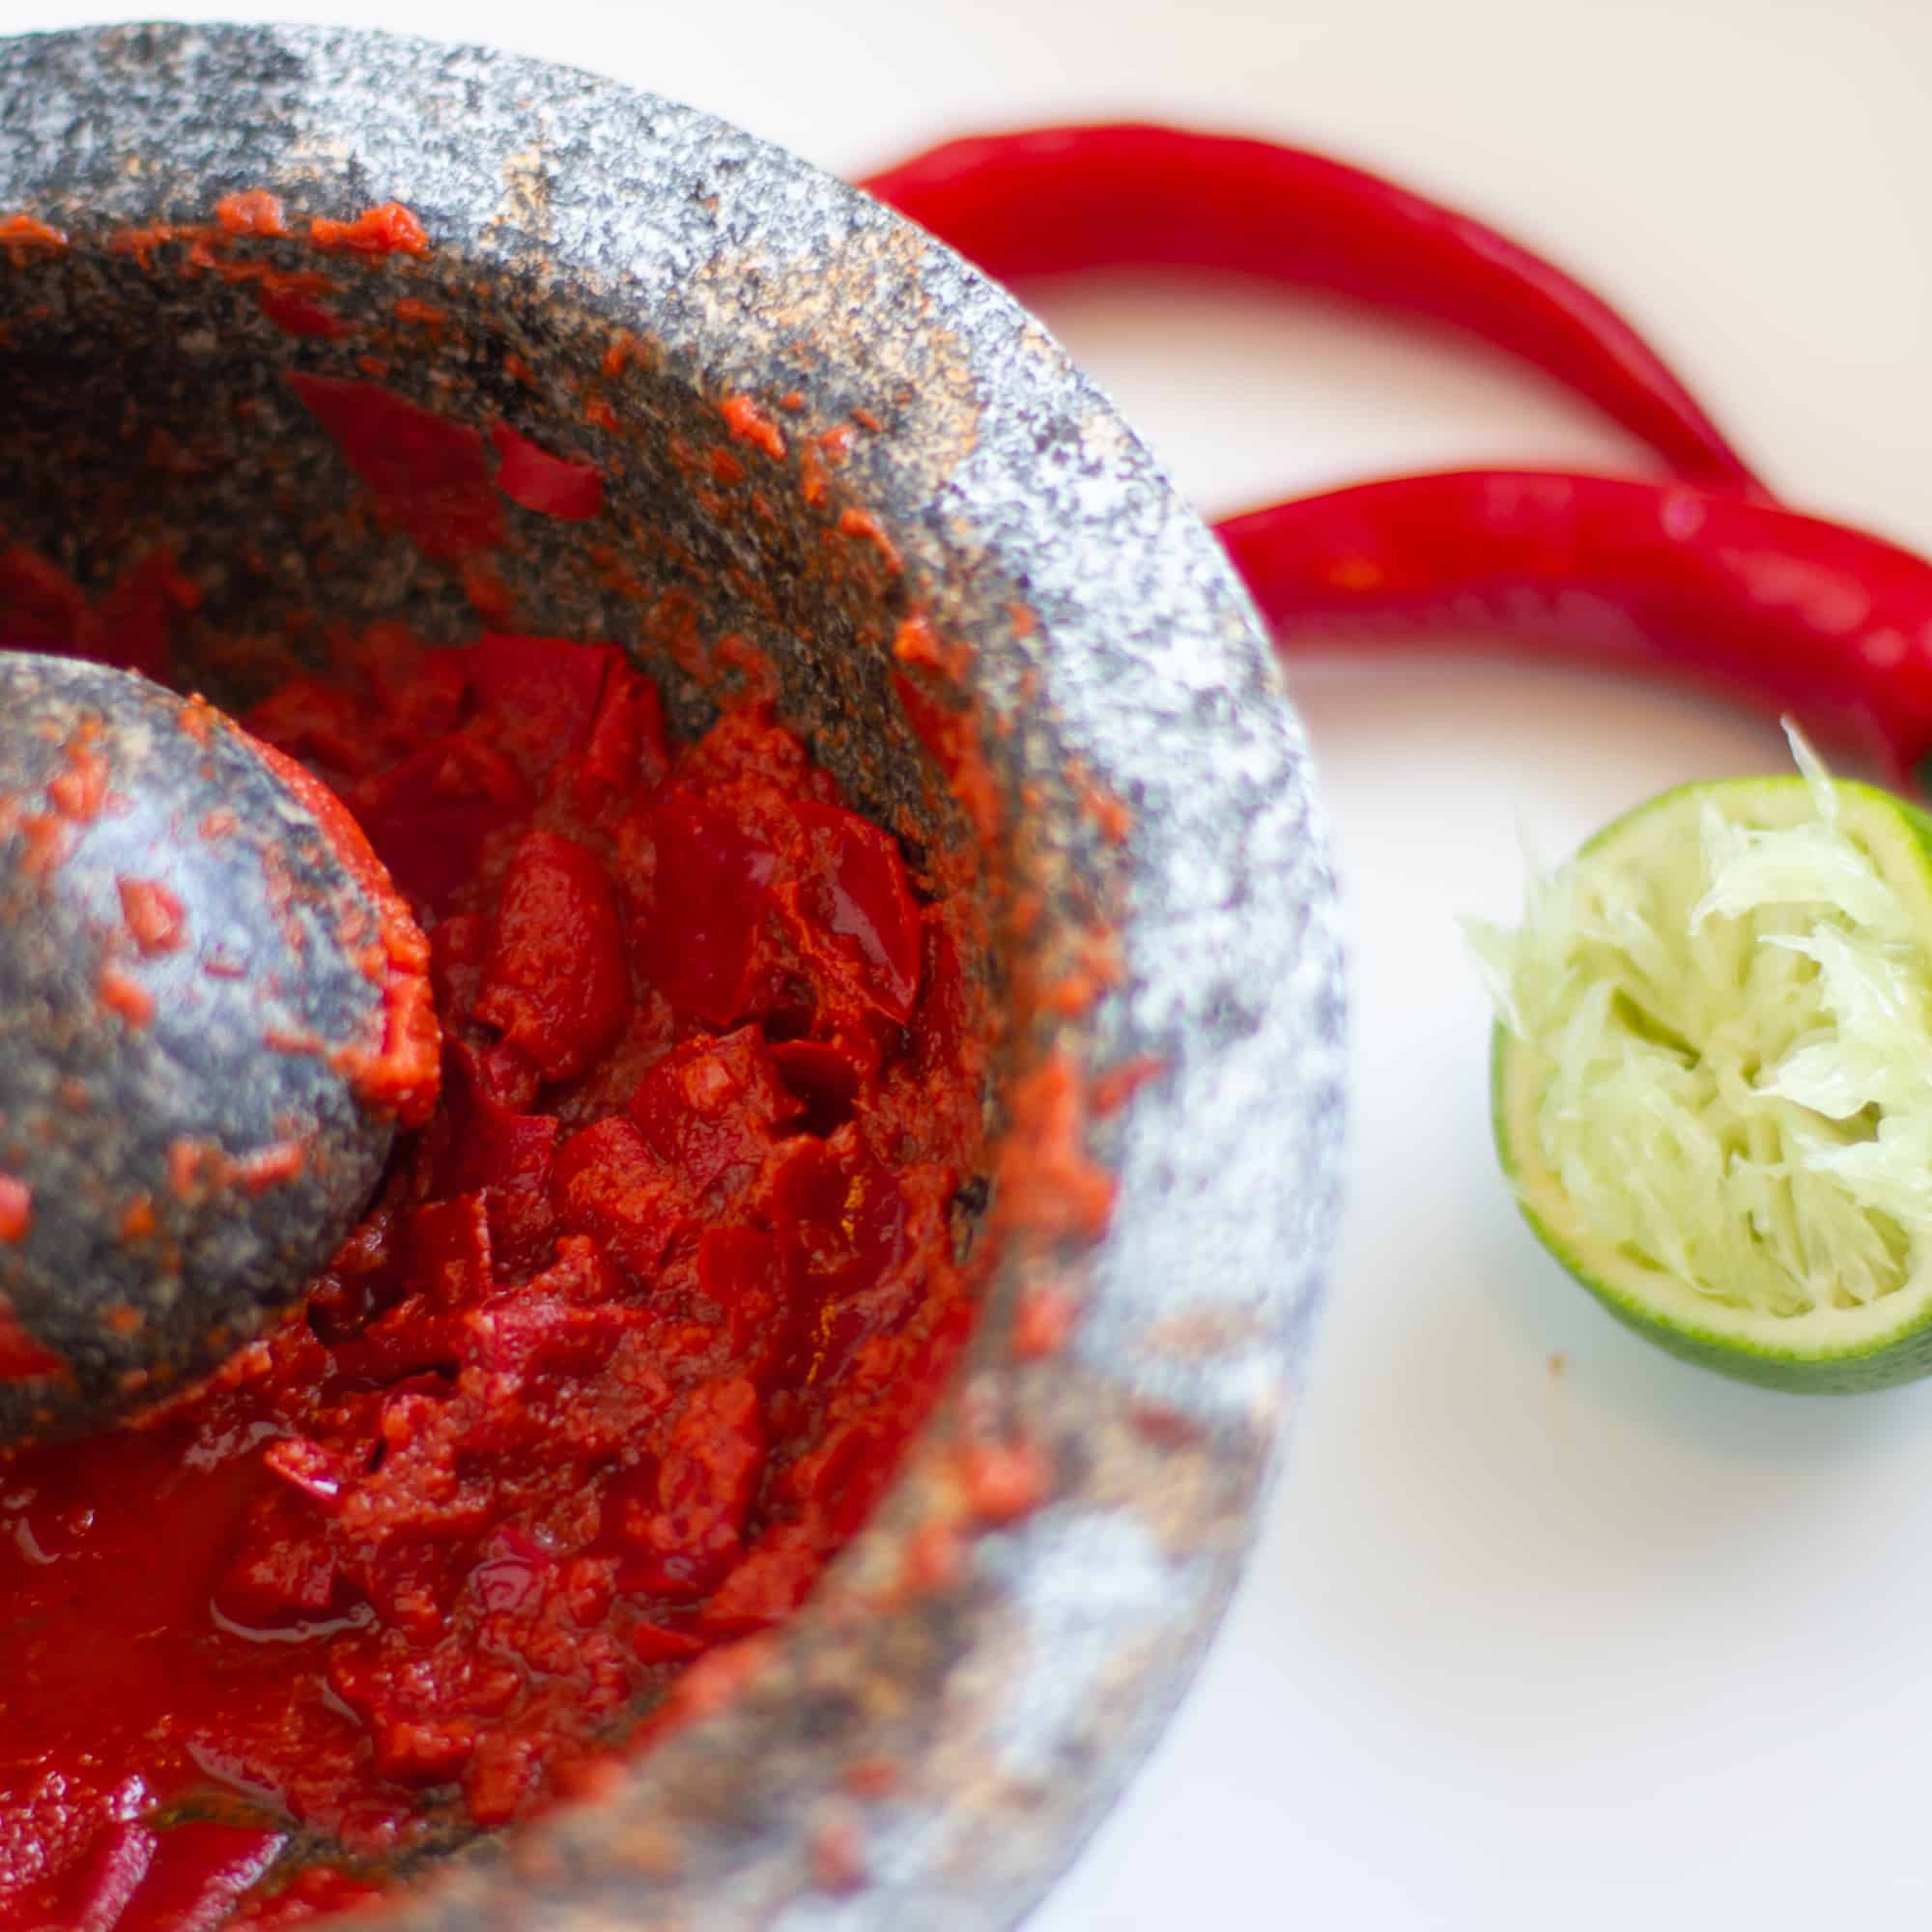 Mortar and pestle with chili peppers.